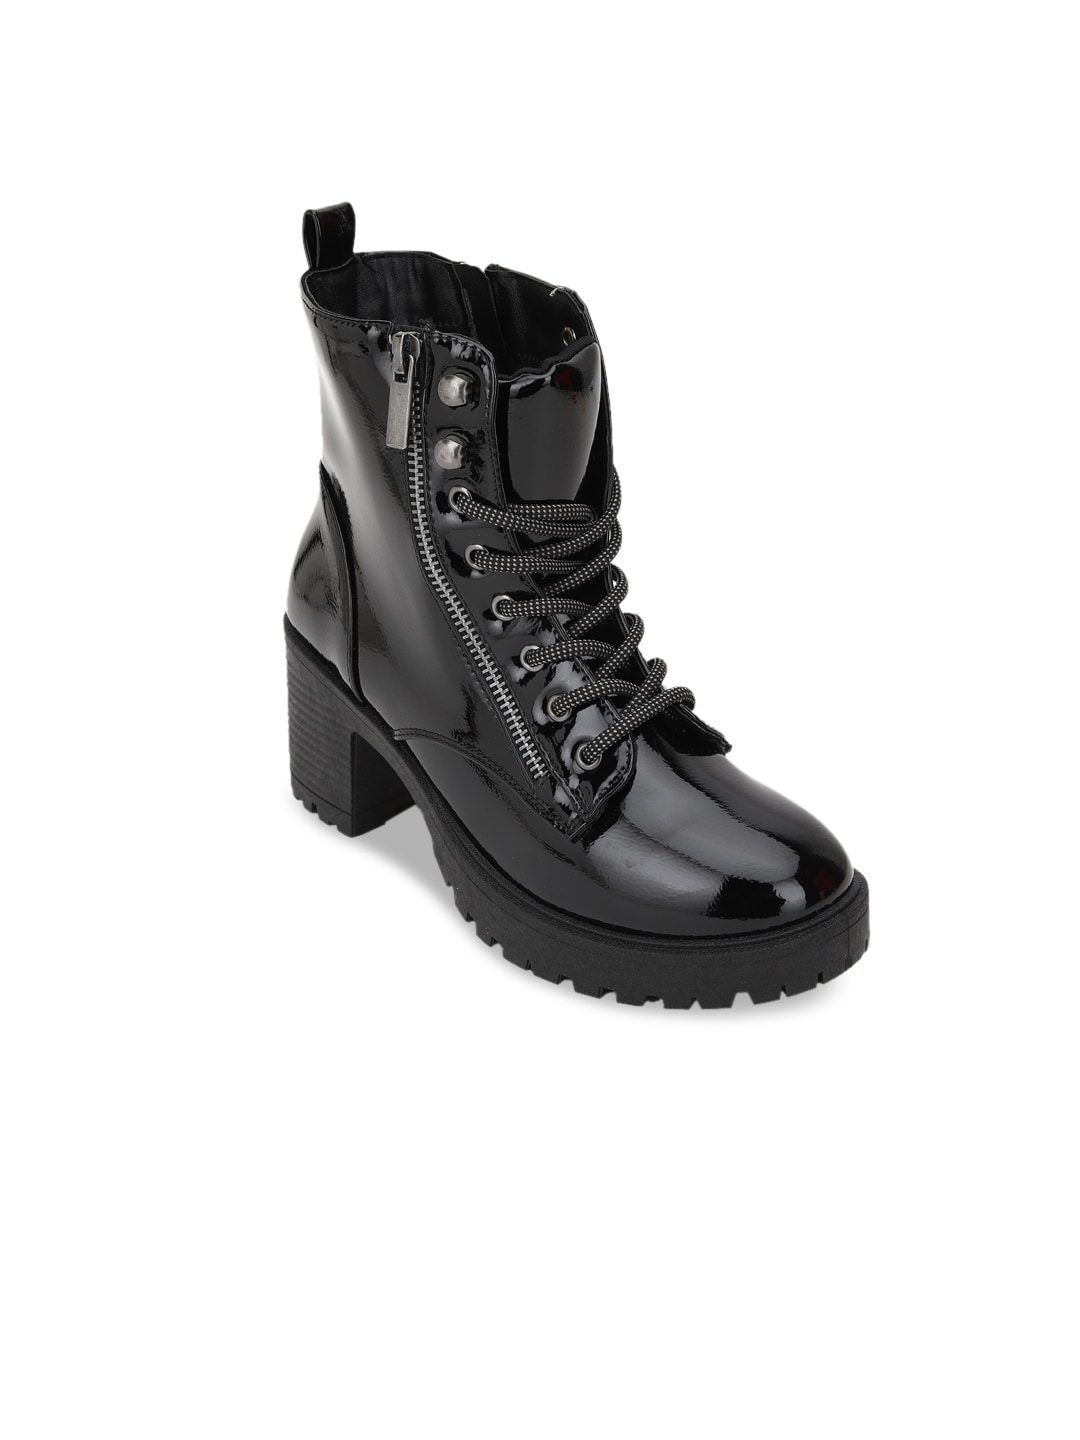 FOREVER 21 Black PU Block Heeled Boots Price in India